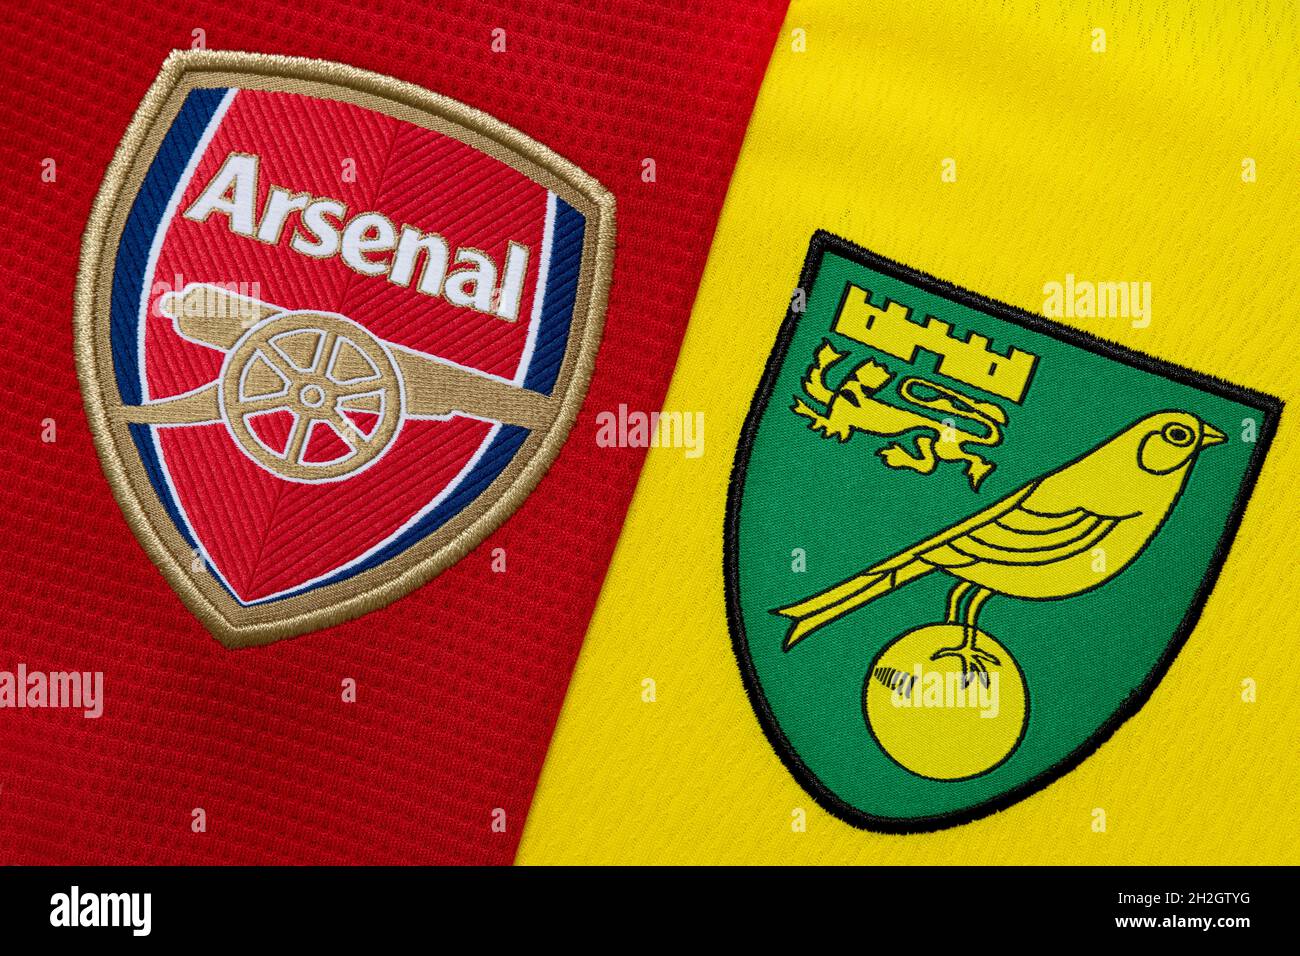 Close up of Arsenal and Norwich club crest. Stock Photo